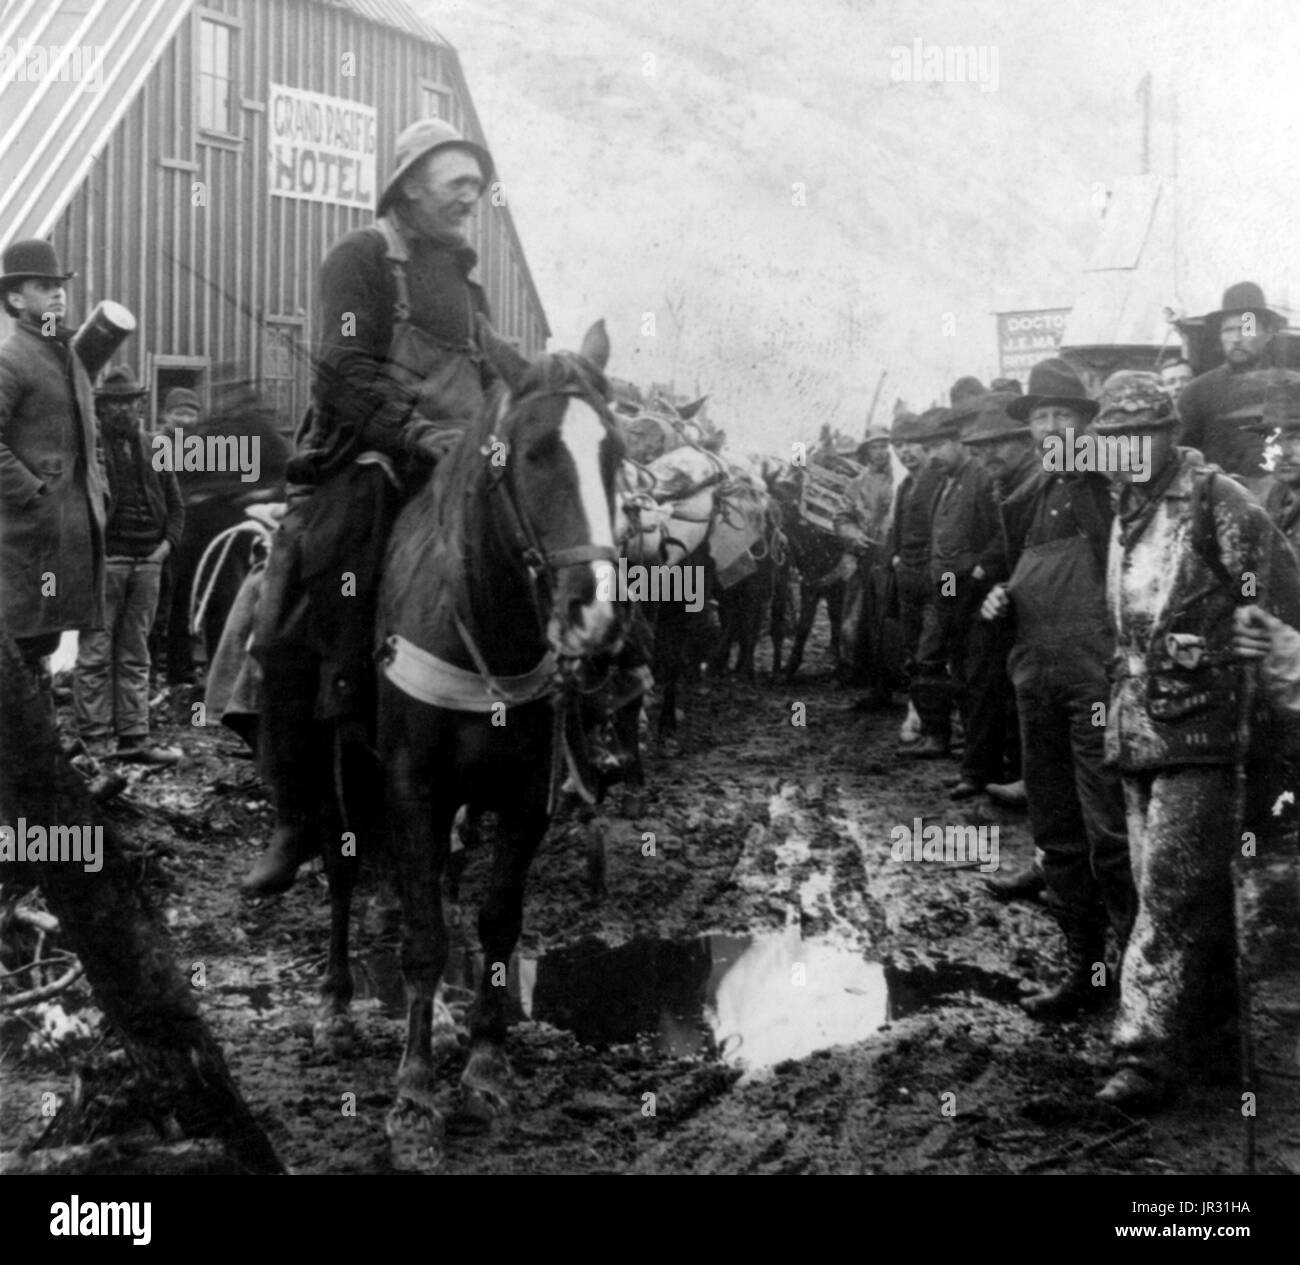 Grand Pacific Hotel. Party en route to the Klondike, Sheep Camp, Alaska. The Klondike Gold Rush was a migration by an estimated 100,000 prospectors to the Klondike region of the Yukon between 1896-99. Gold was discovered by local miners on August 16, 1896 and, when news reached Seattle and San Francisco, it triggered a stampede of would-be prospectors. To reach the gold fields most took the route through the ports of Dyea and Skagway in Alaska. Here, the Klondikers could follow either the Chilkoot or the White Pass trails to the Yukon River and sail down to the Klondike. Each of them was requi Stock Photo